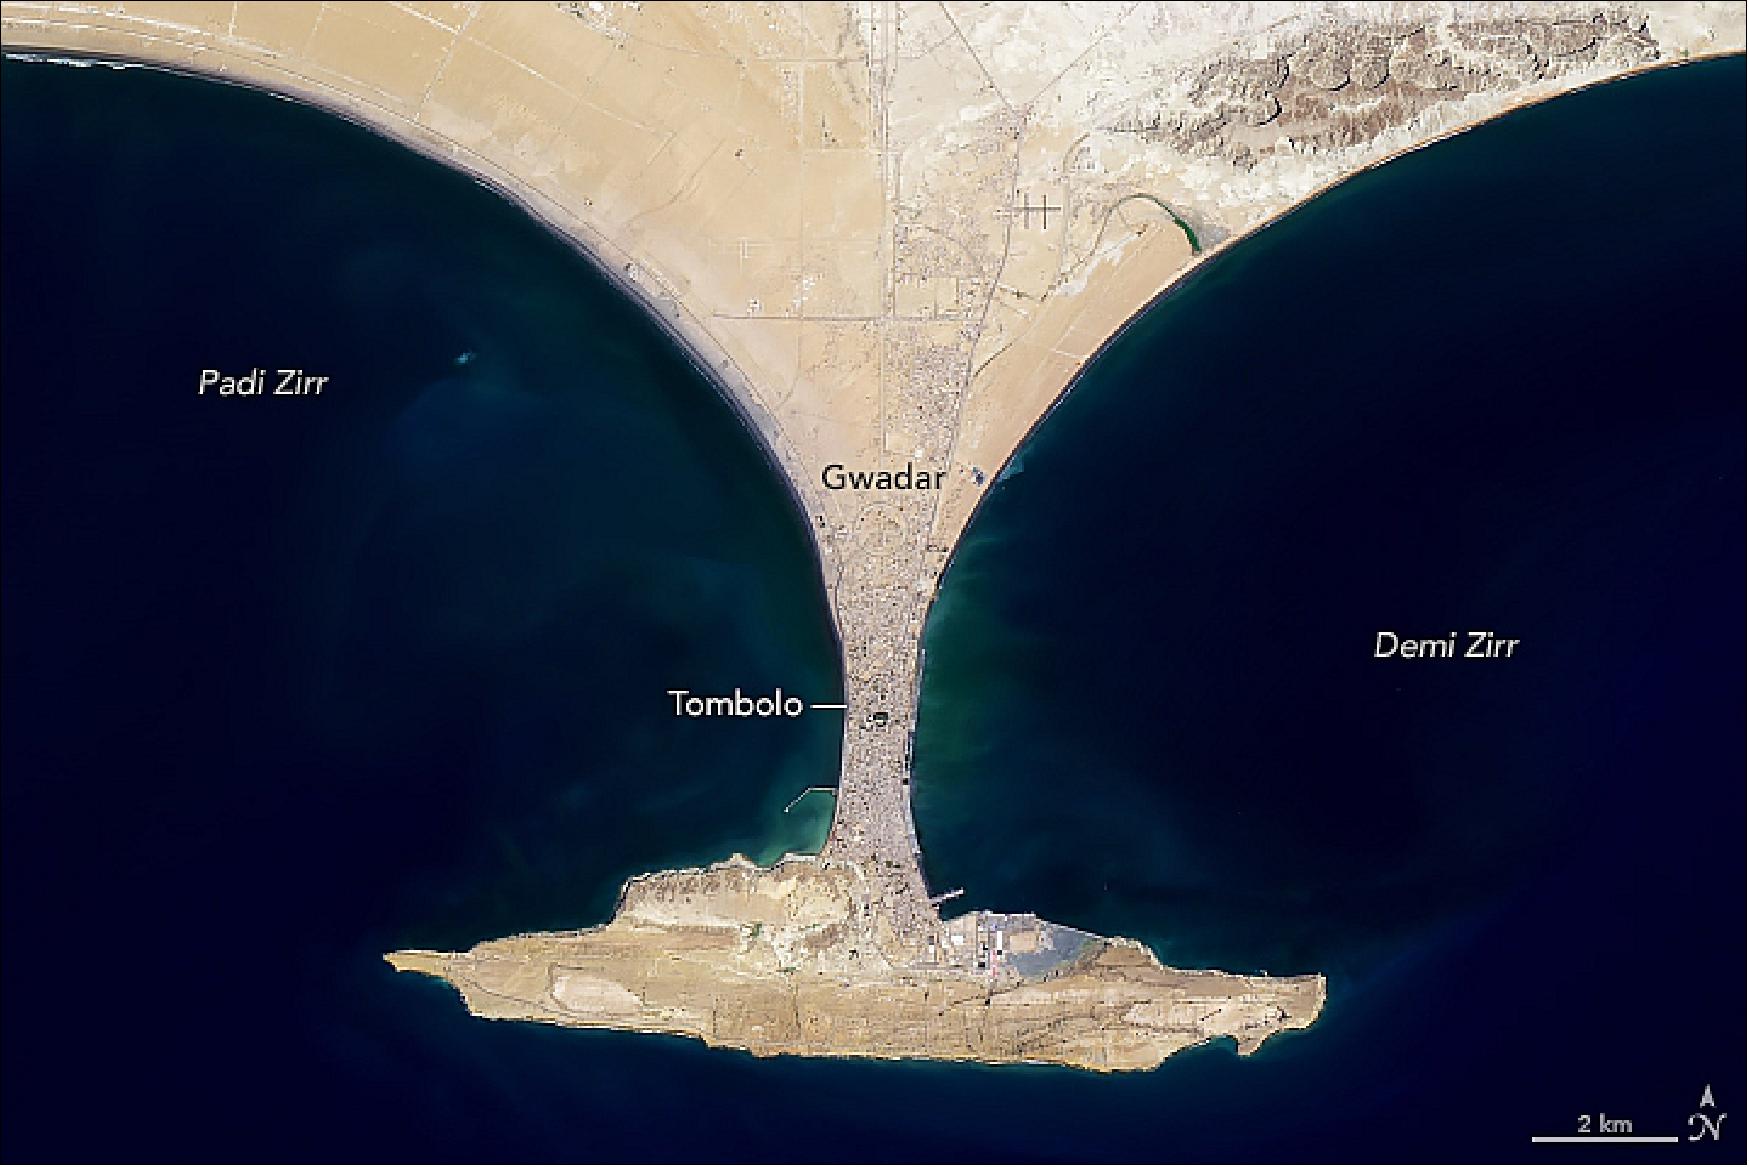 Figure 63: Nadir OLI image of the Gwadar peninsula acquired on 27 April 2019 (image credit: NASA Earth Observatory image by Joshua Stevens, using Landsat data from the U.S. Geological Survey, story by Adam Voiland)